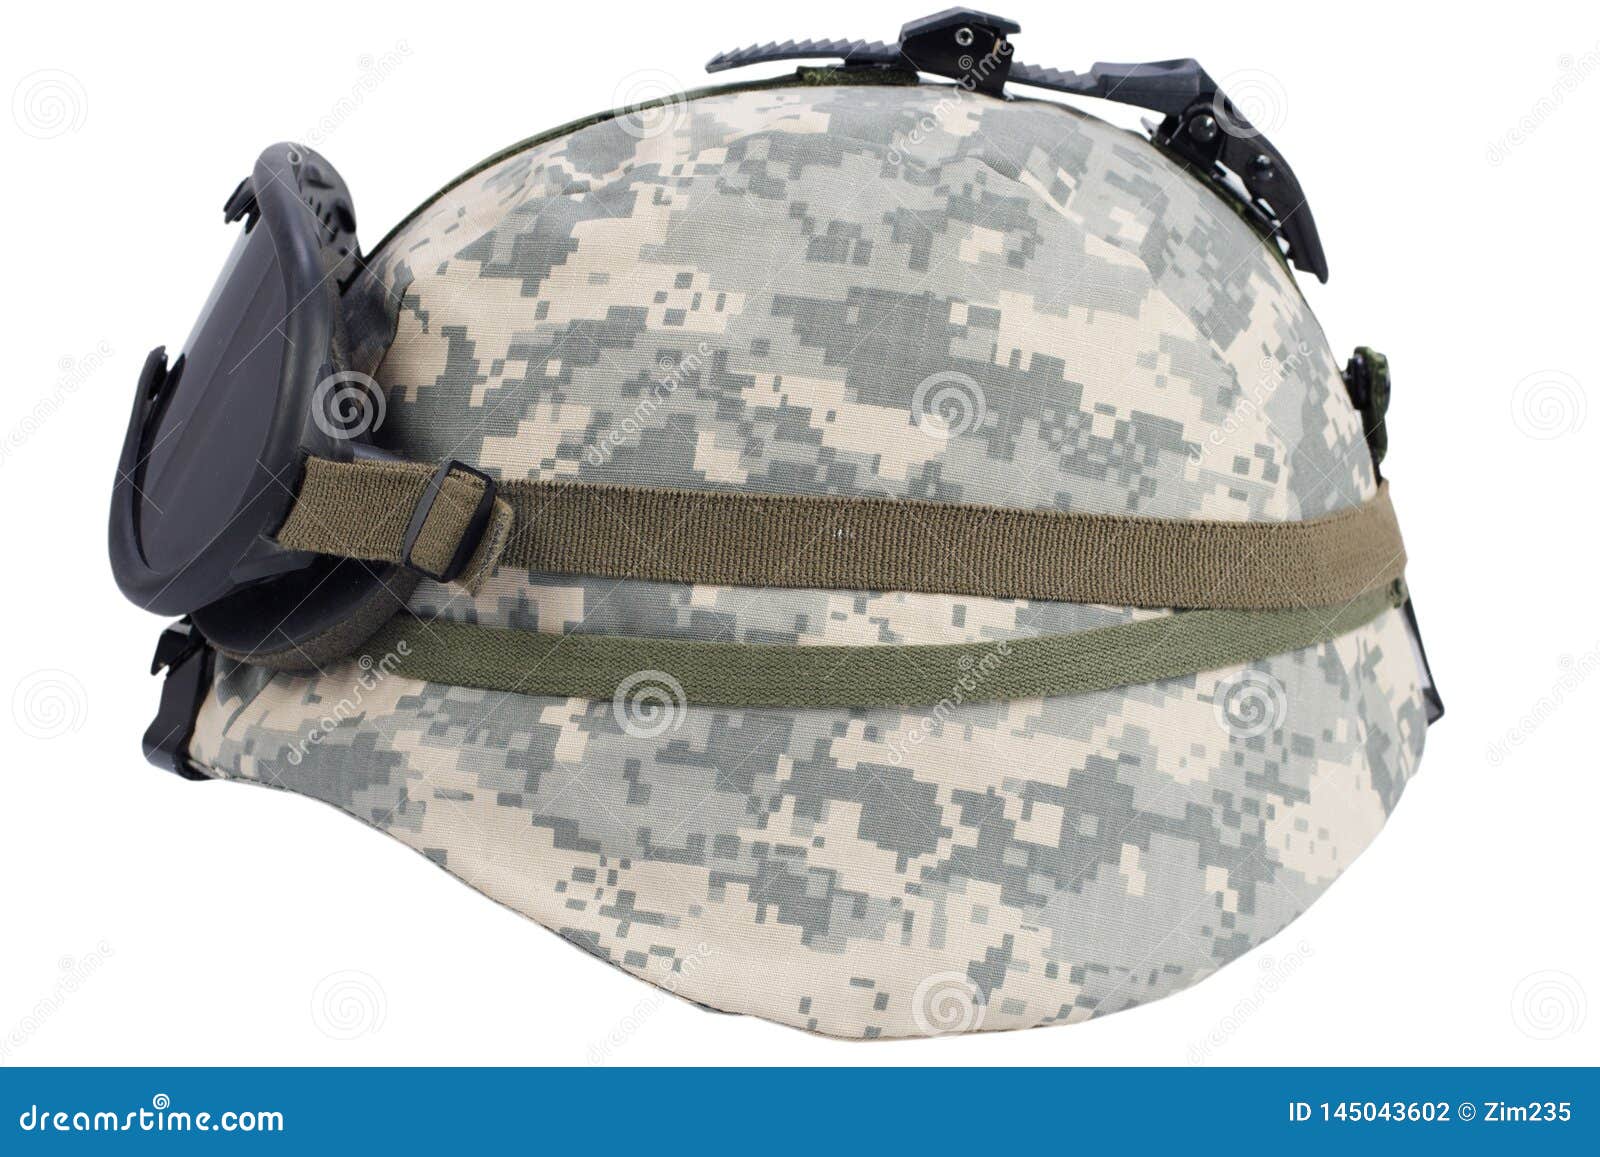 Us Army Kevlar Helmet with Goggles Stock Photo - Image of storm